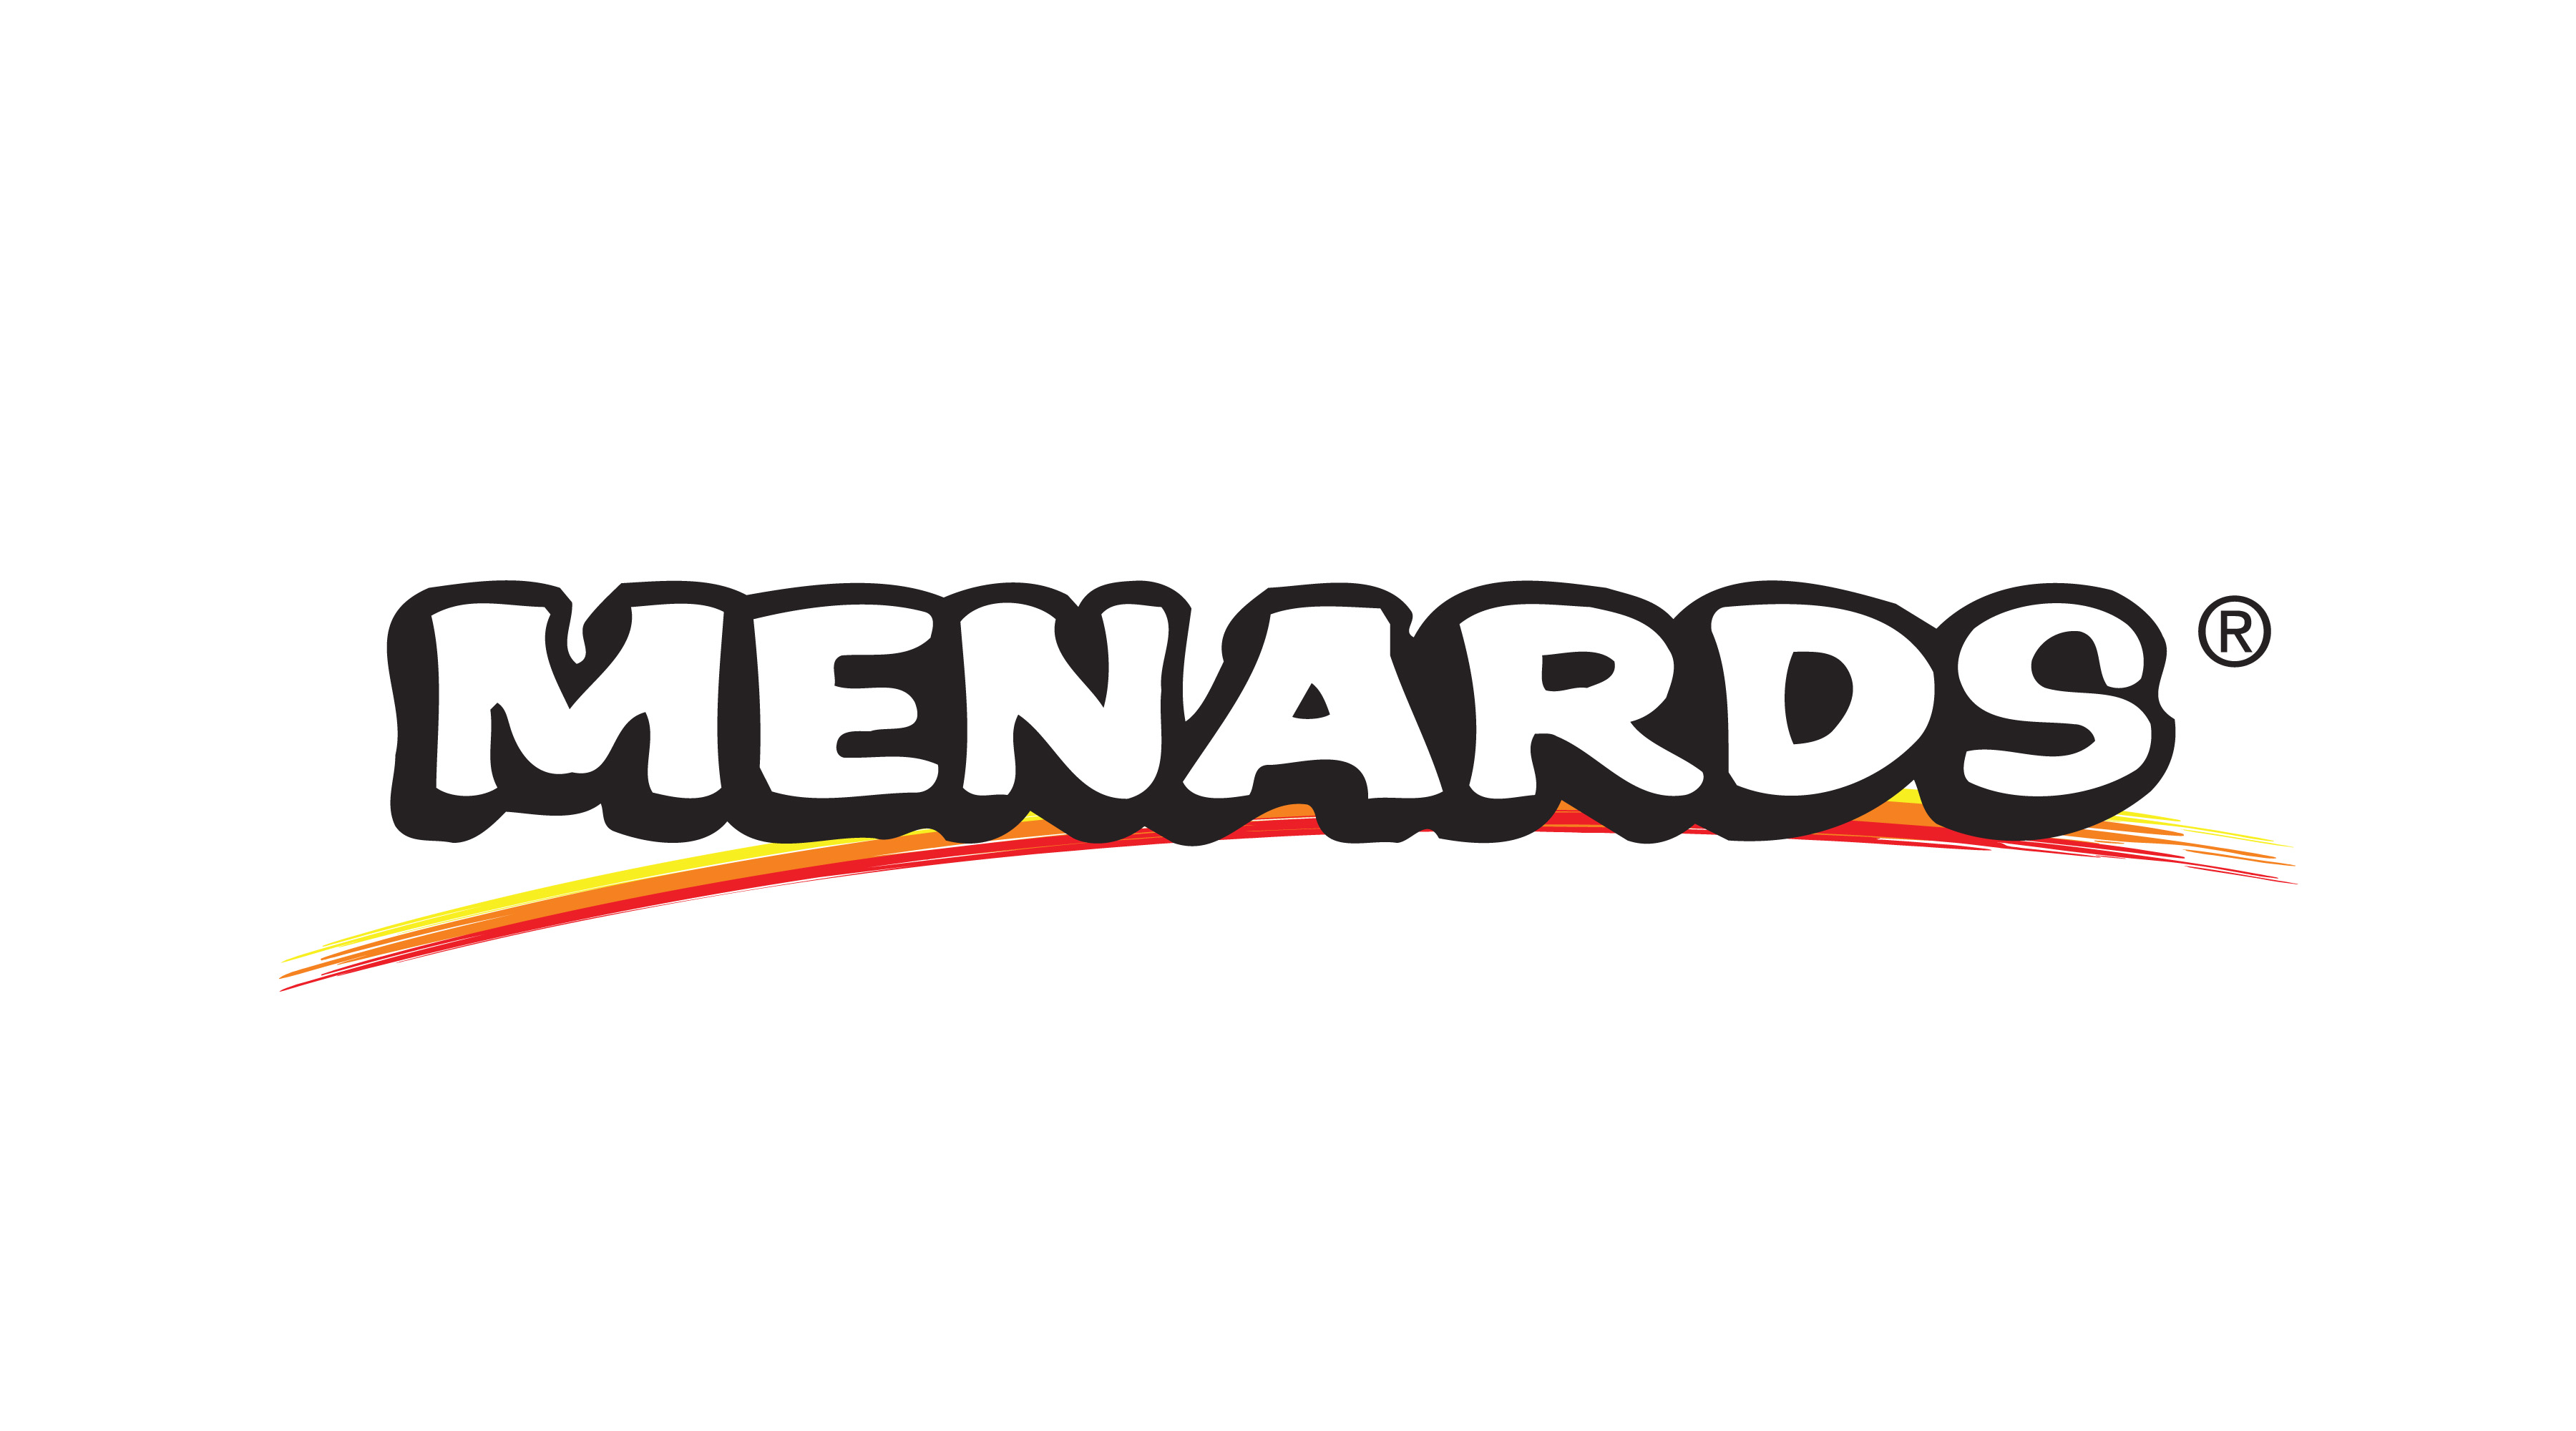 Learn All About the Secret Menards Rebate